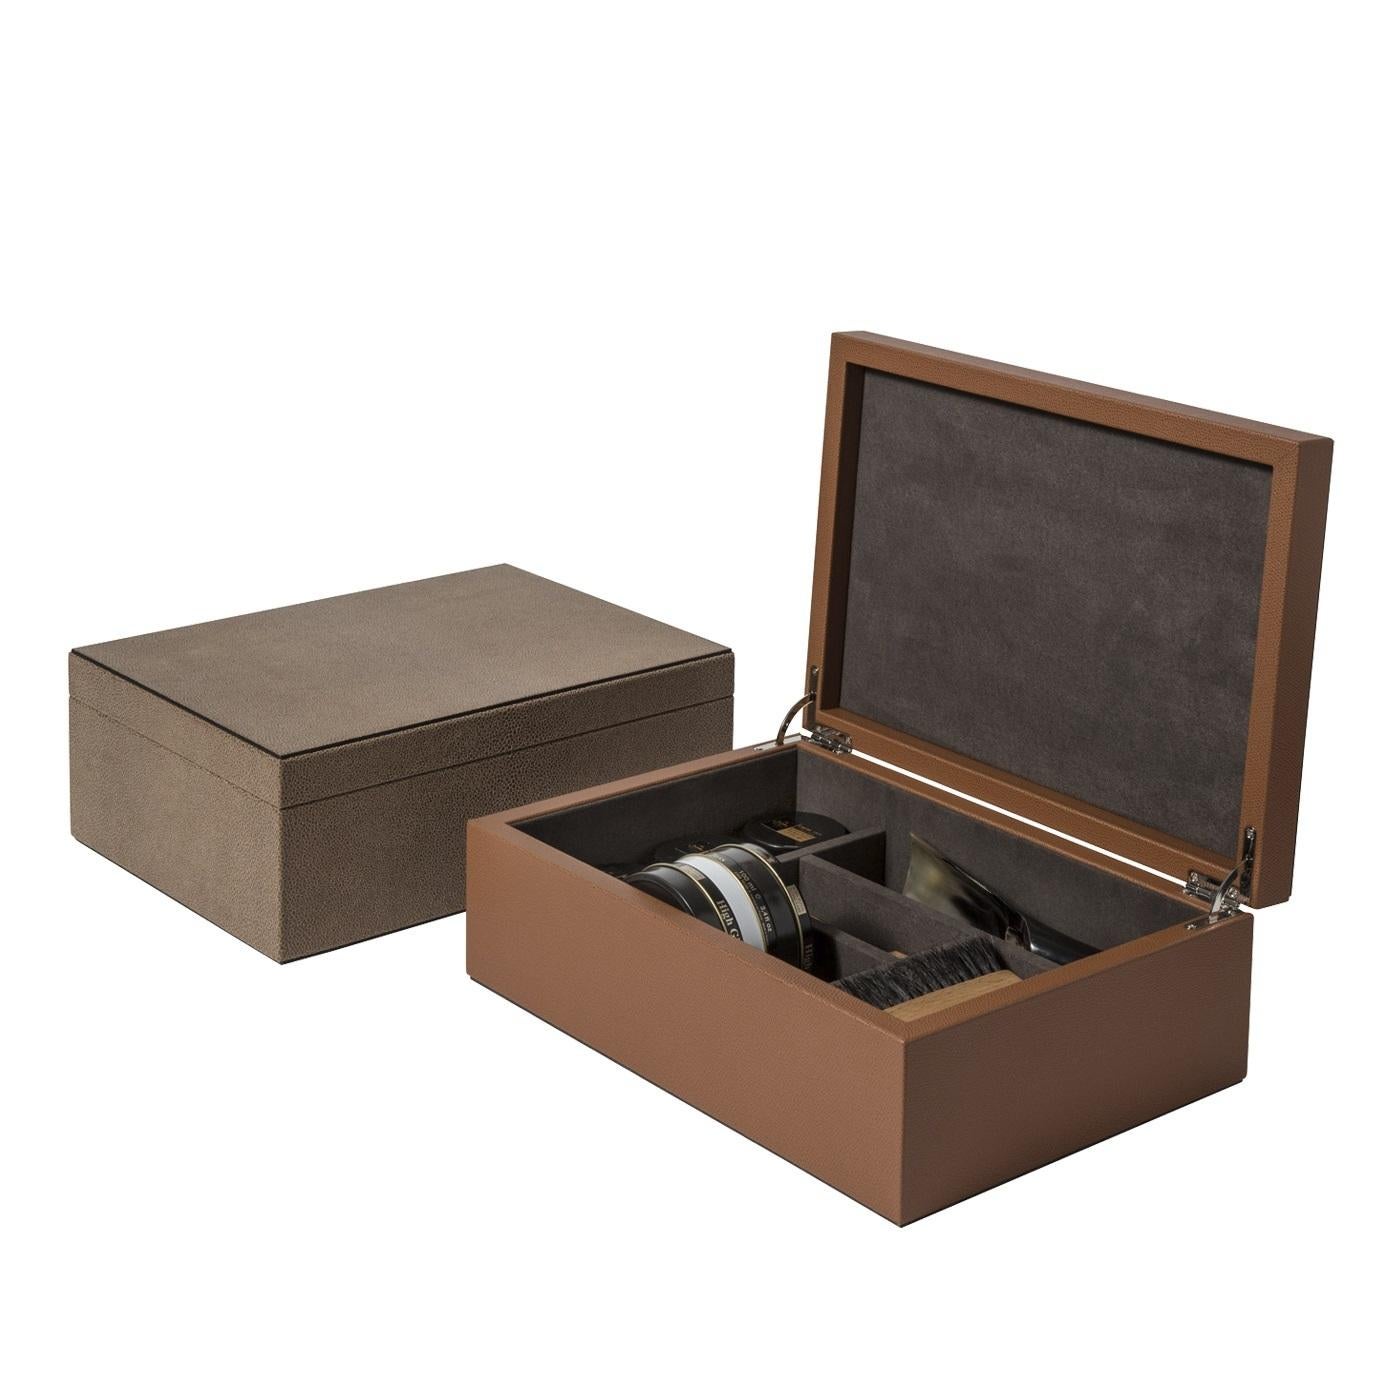 This elegant and functional box is equipped with all the necessary items to care for shoes: a shoehorn with a handmade Horn handle, two brushes, two small brushes for polishing, three jars with shoe conditioners, and three boxes with shoe polish.